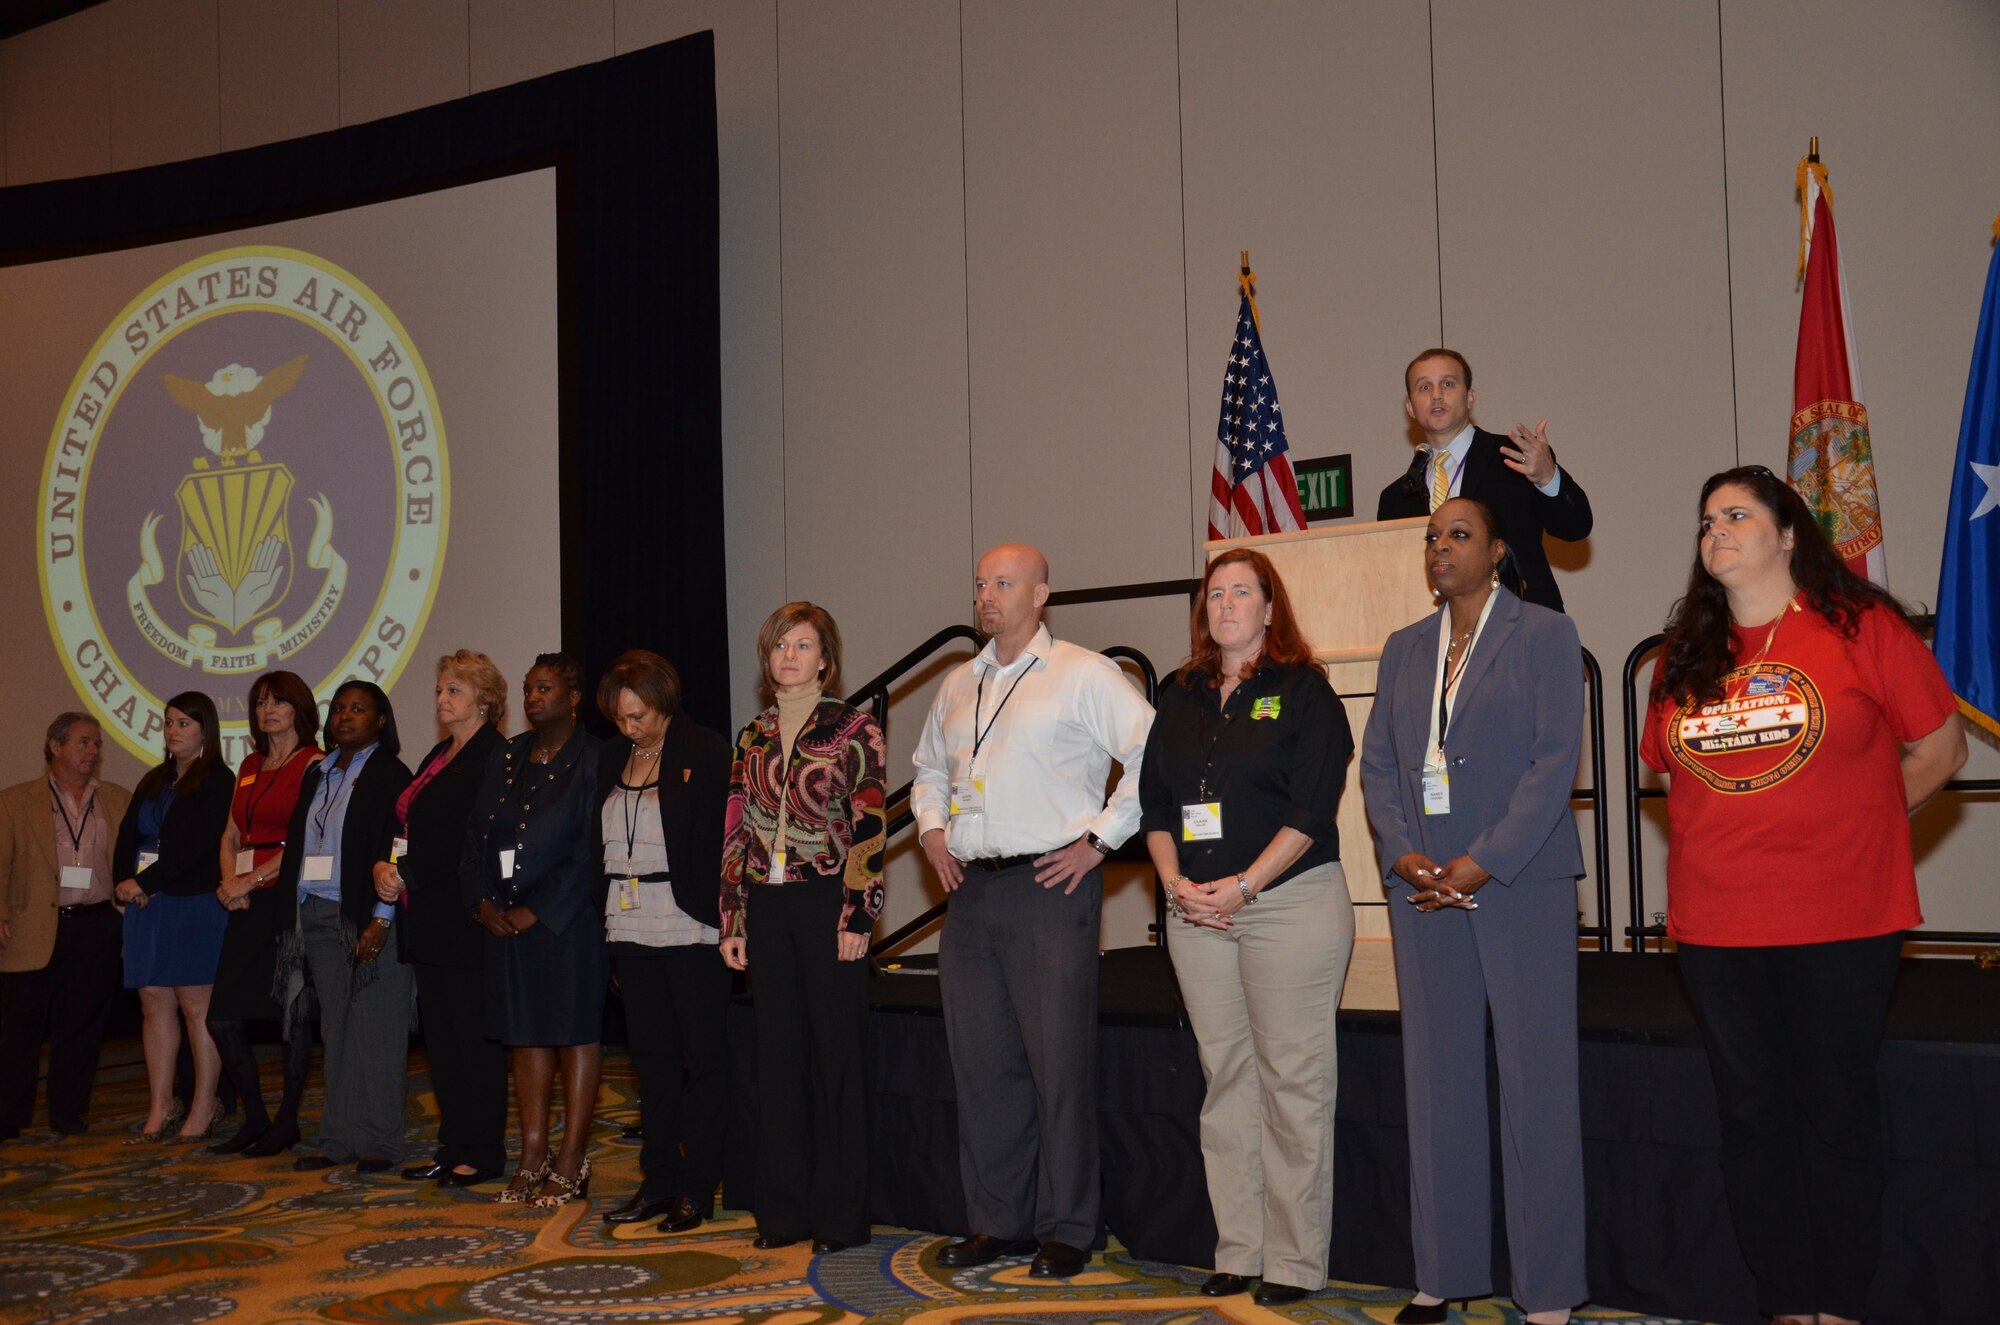 Approximately 30 community partners and organizations line up in the general session at Air Force Reserve Command’s Yellow Ribbon event in Orlando, Fla., Dec. 17, 2011. Reservists who attended the weekend event were able to visit the different organizations’ representatives to learn about specific pre- and post-deployment benefits for them and their dependents. (U.S. Air Force photo/Staff Sgt. Anna-Marie Wyant)